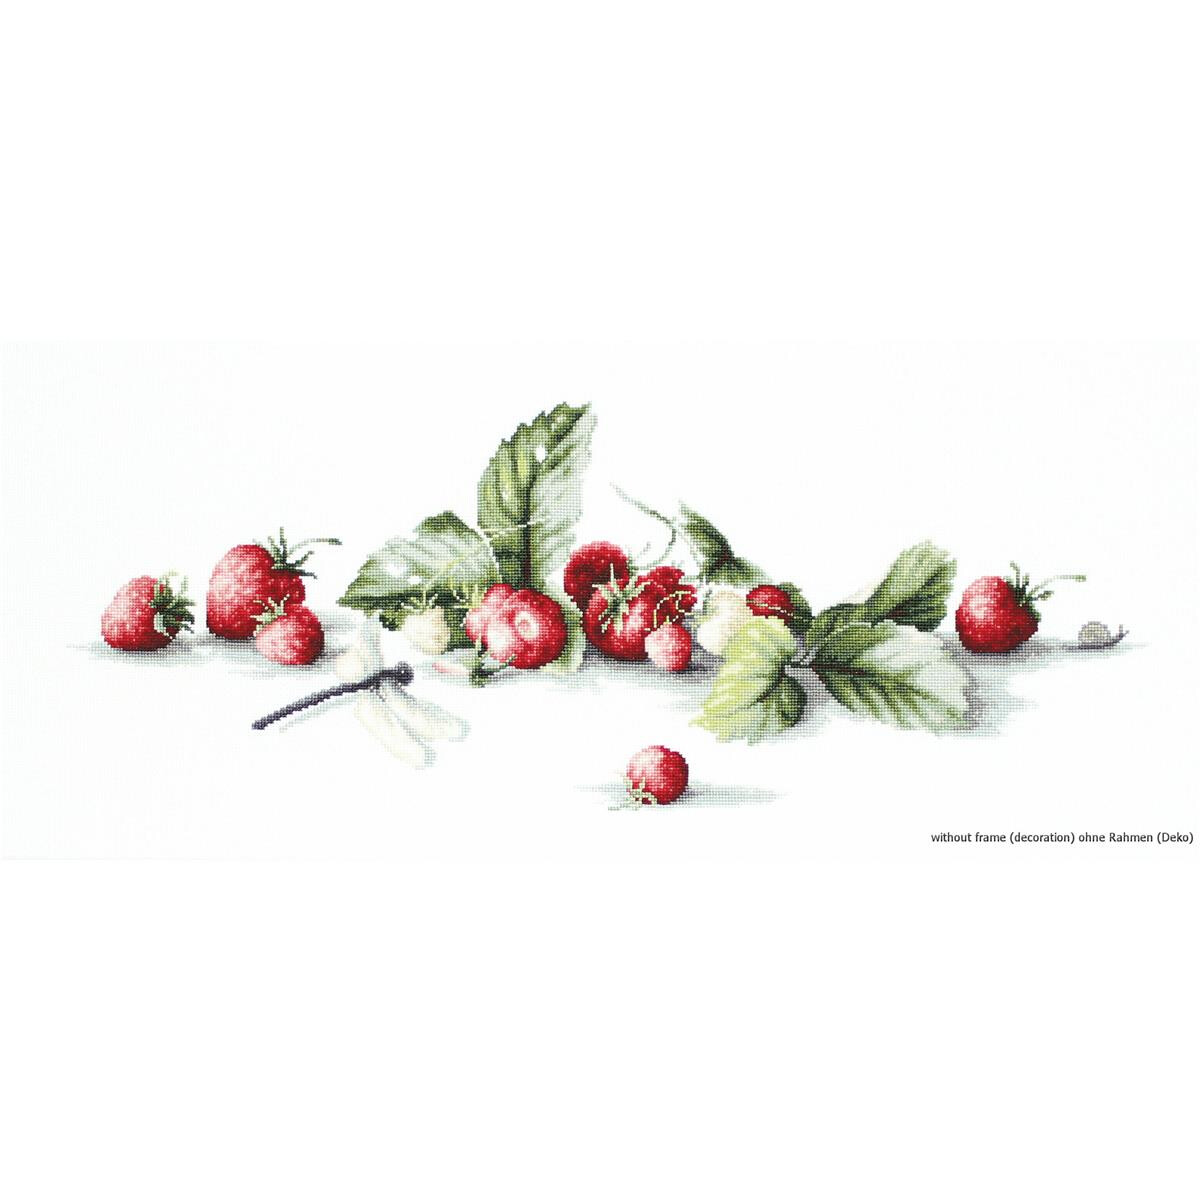 A watercolor shows a collection of fresh strawberries,...